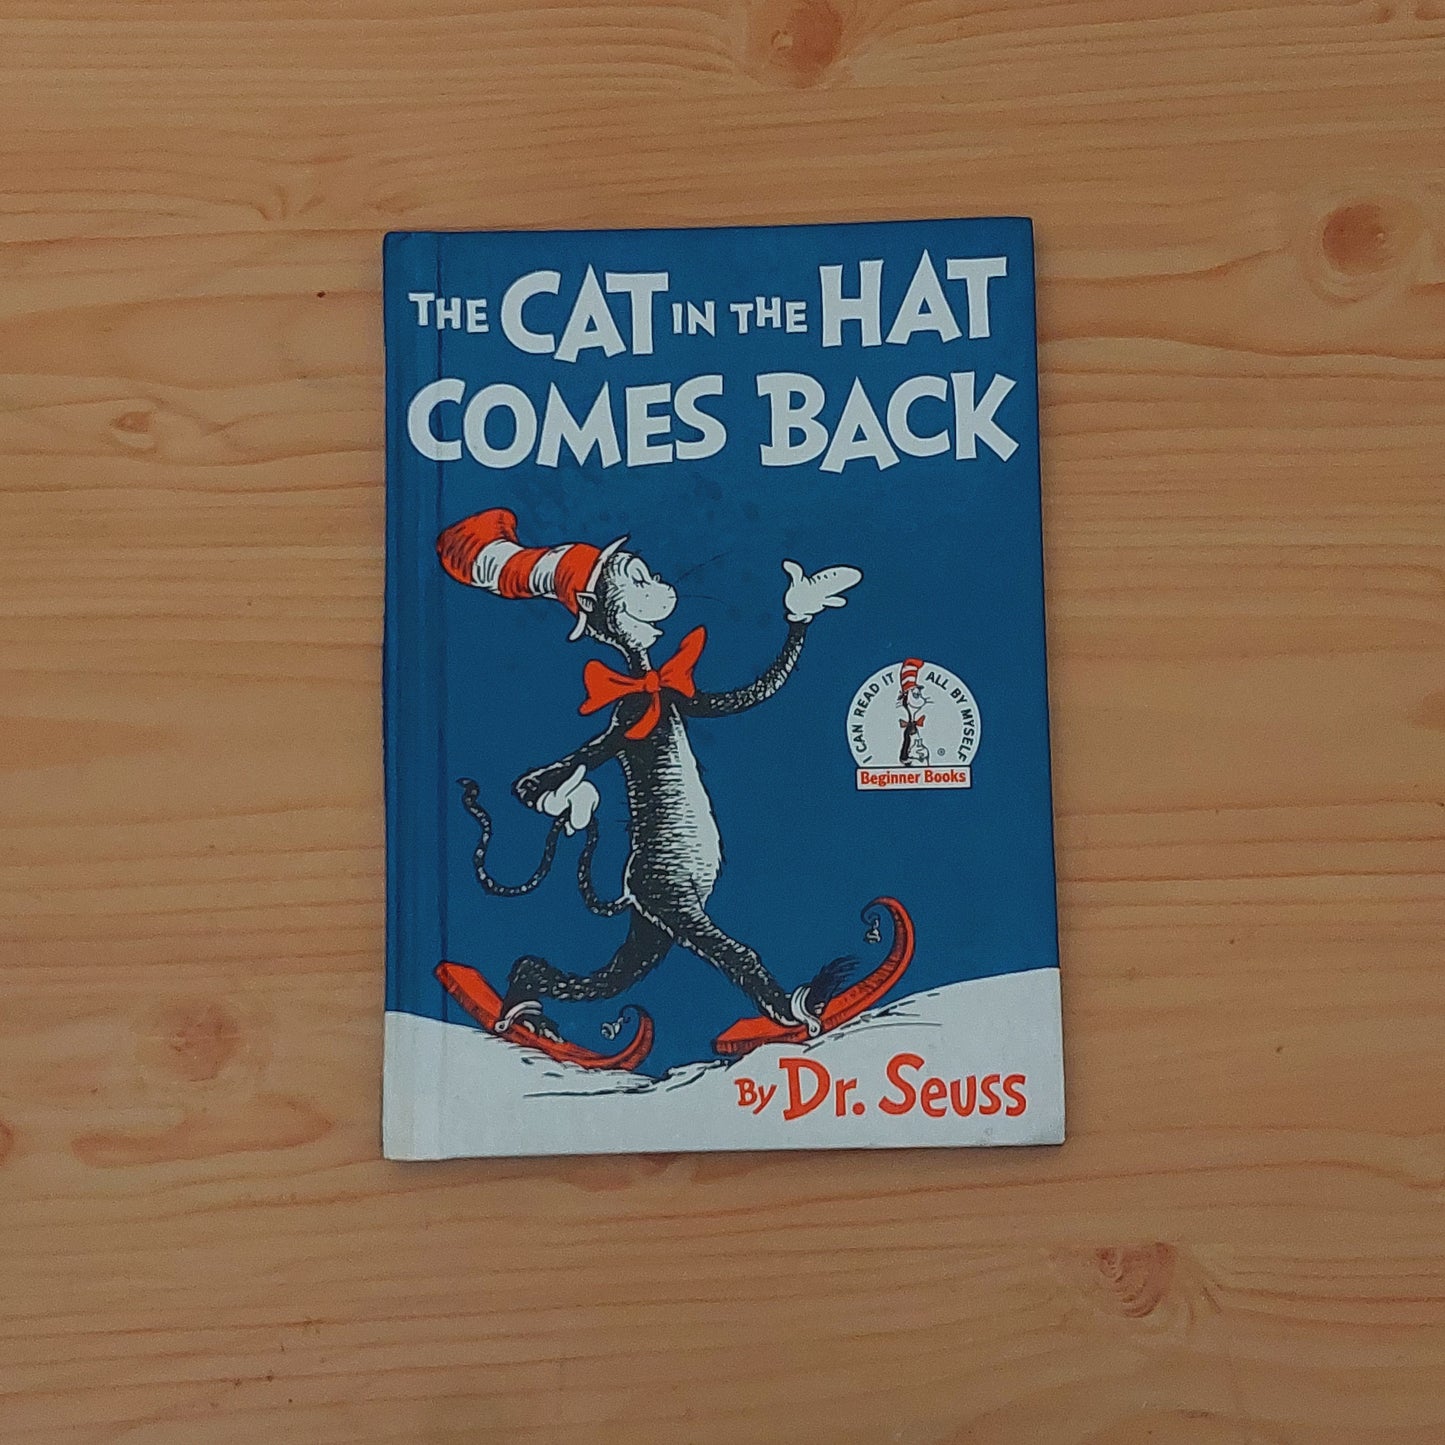 The Cat in the Hat Comes Back by Dr. Seuss – Childhood Ink